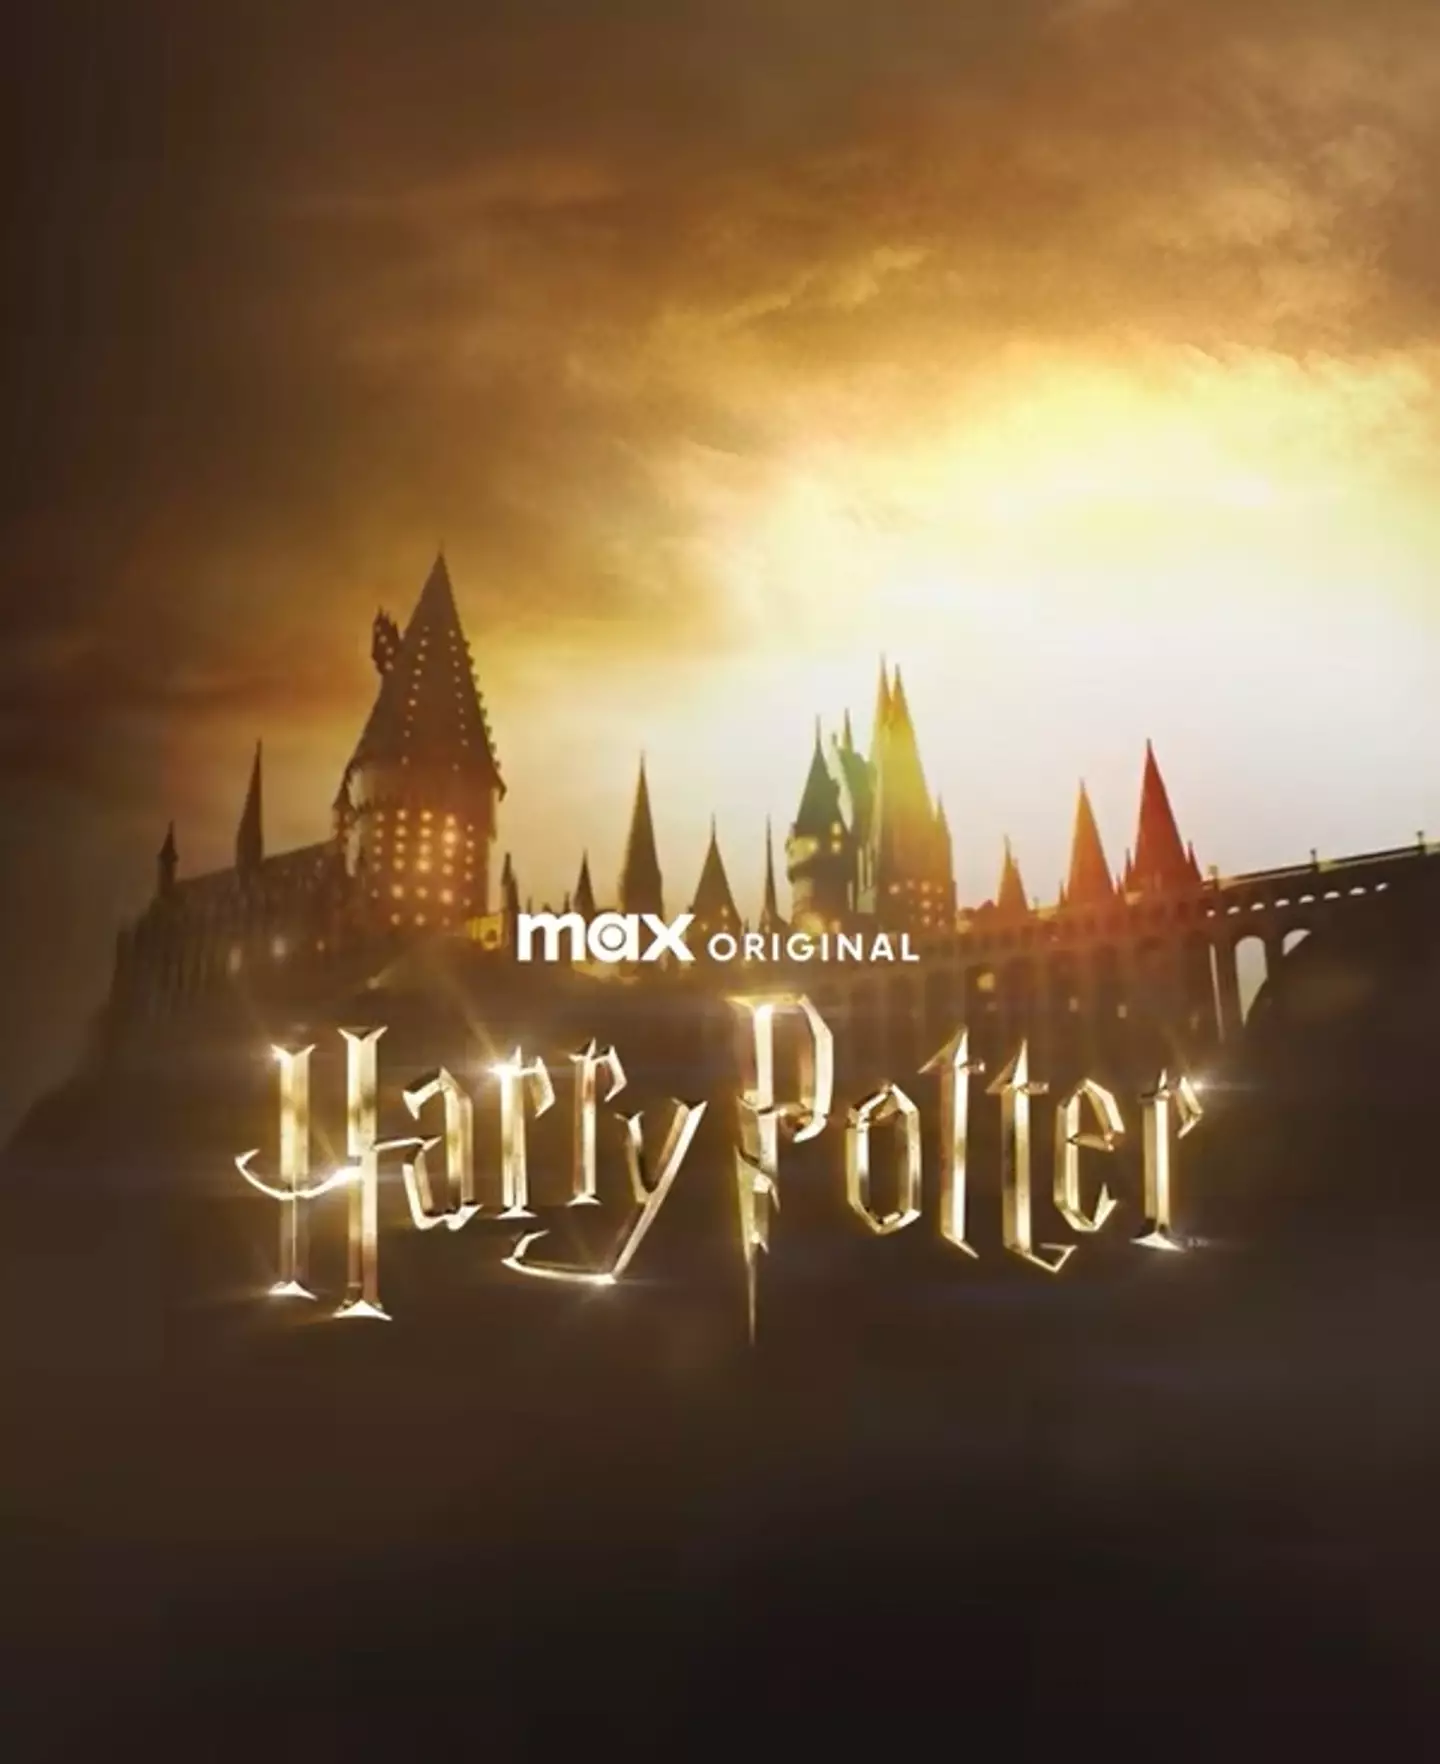 A new Harry Potter series is on the way.